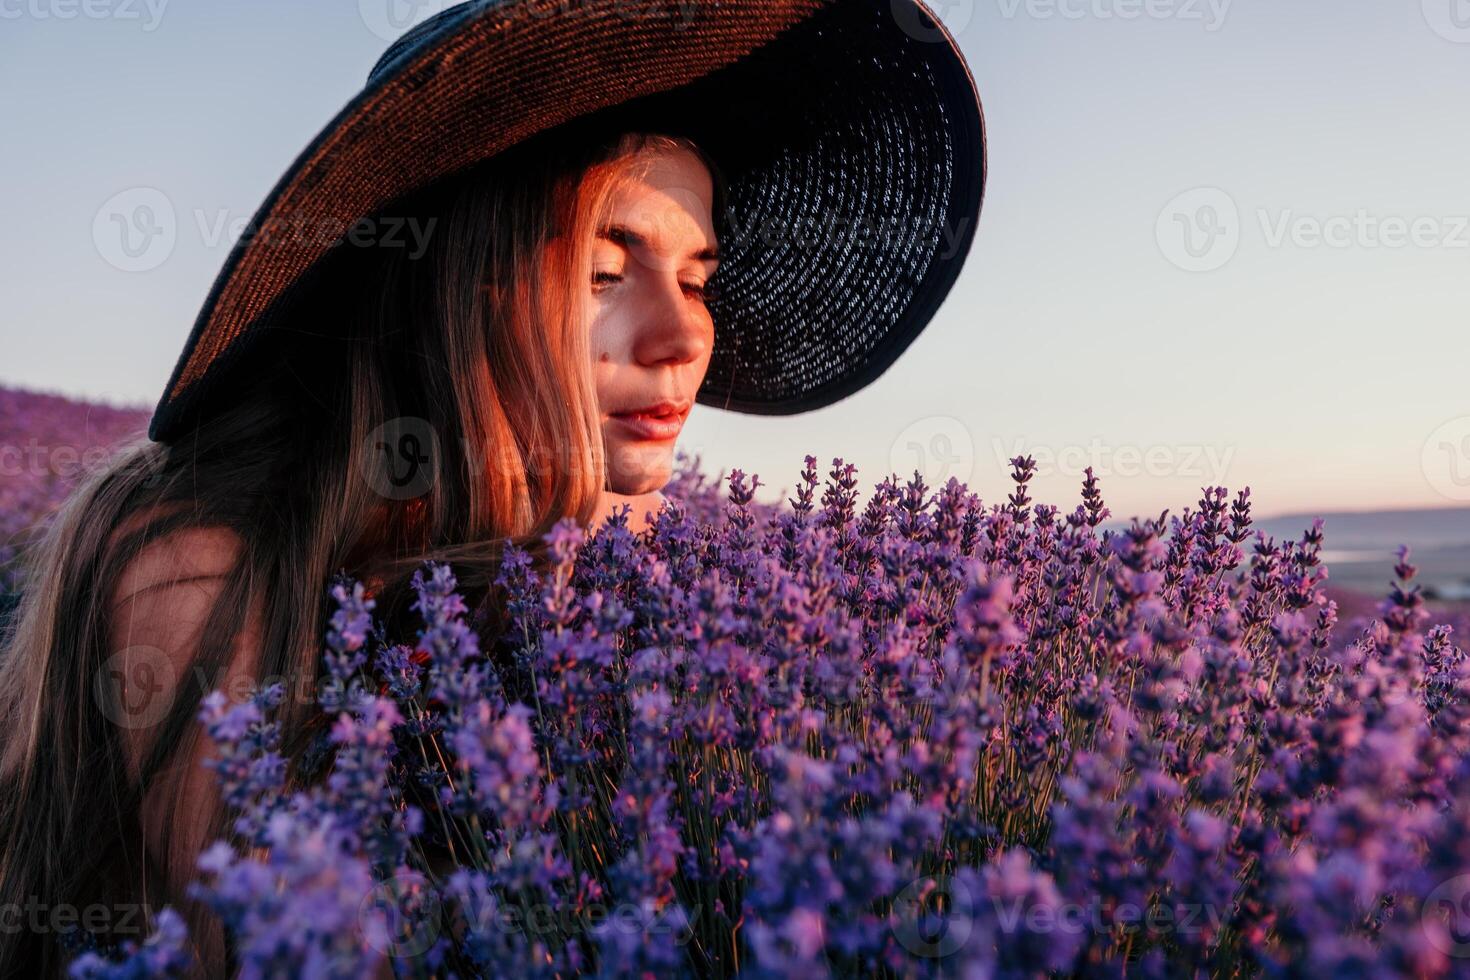 Woman lavender field. Happy carefree woman in black dress and hat with large brim smelling a blooming lavender on sunset. Perfect for inspirational and warm concepts in travel and wanderlust. Close up photo